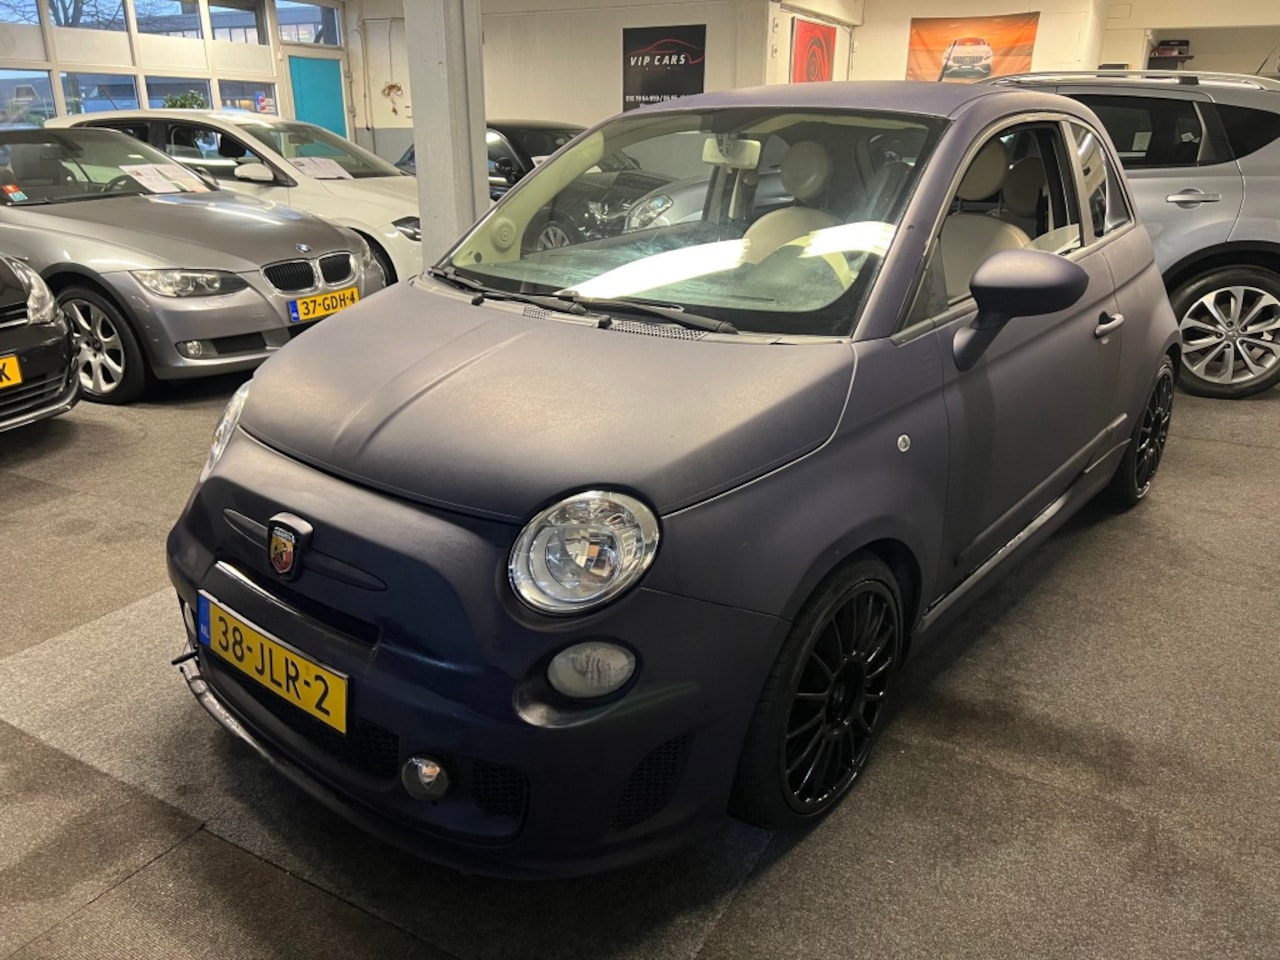 Pracht Fervent Gearceerd abarth fiat 500 automaat used – Search for your used car on the parking